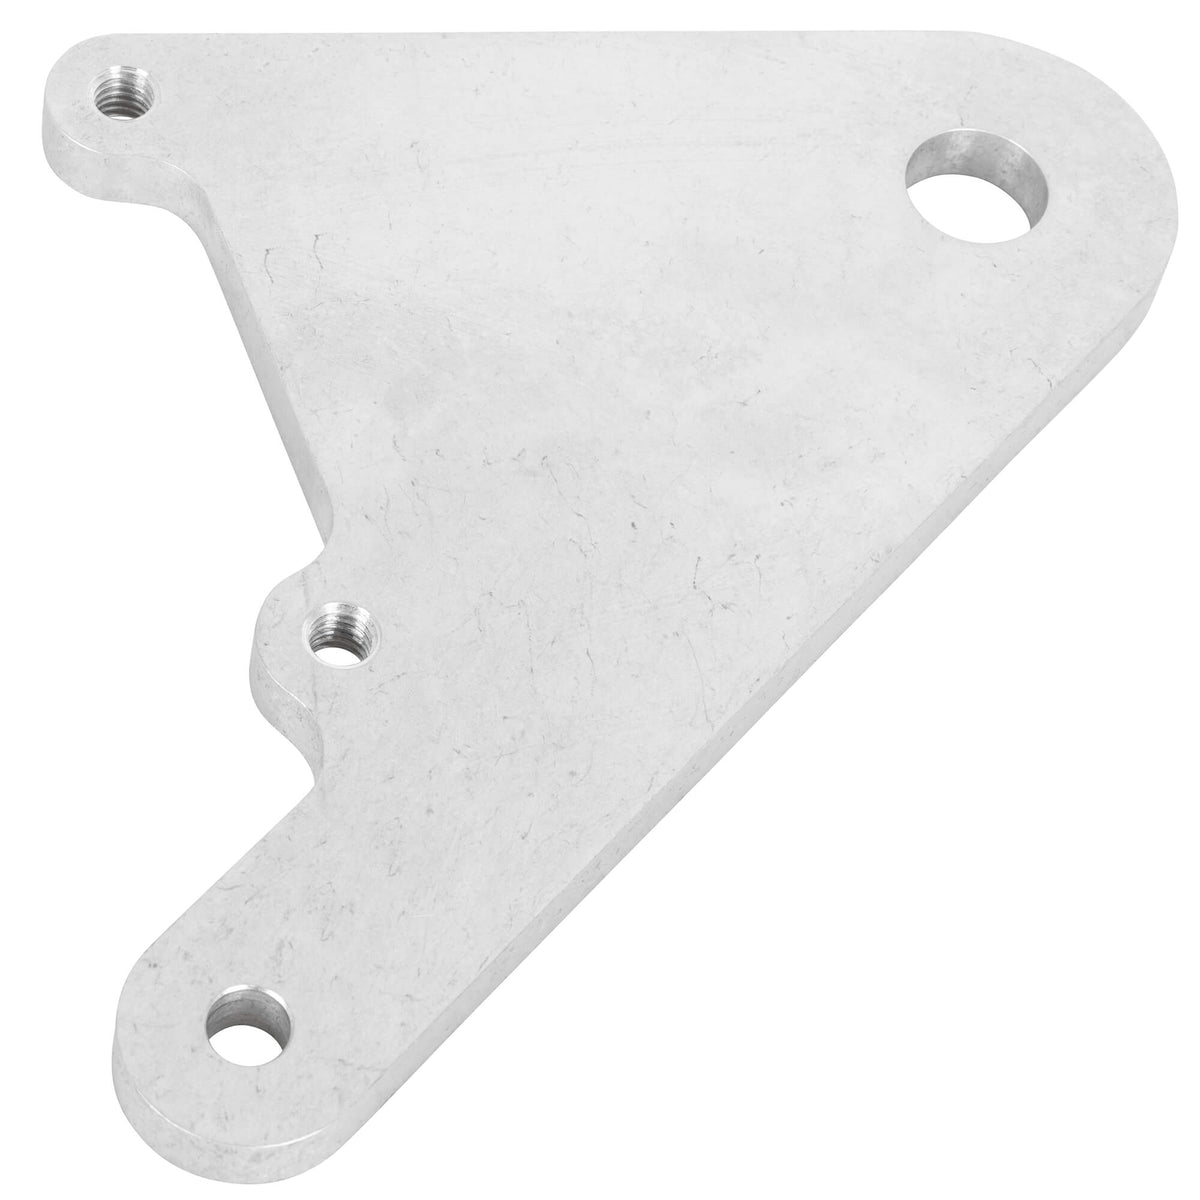 Lowbrow Customs Rear Caliper Bracket for Rigid Models with 11-1